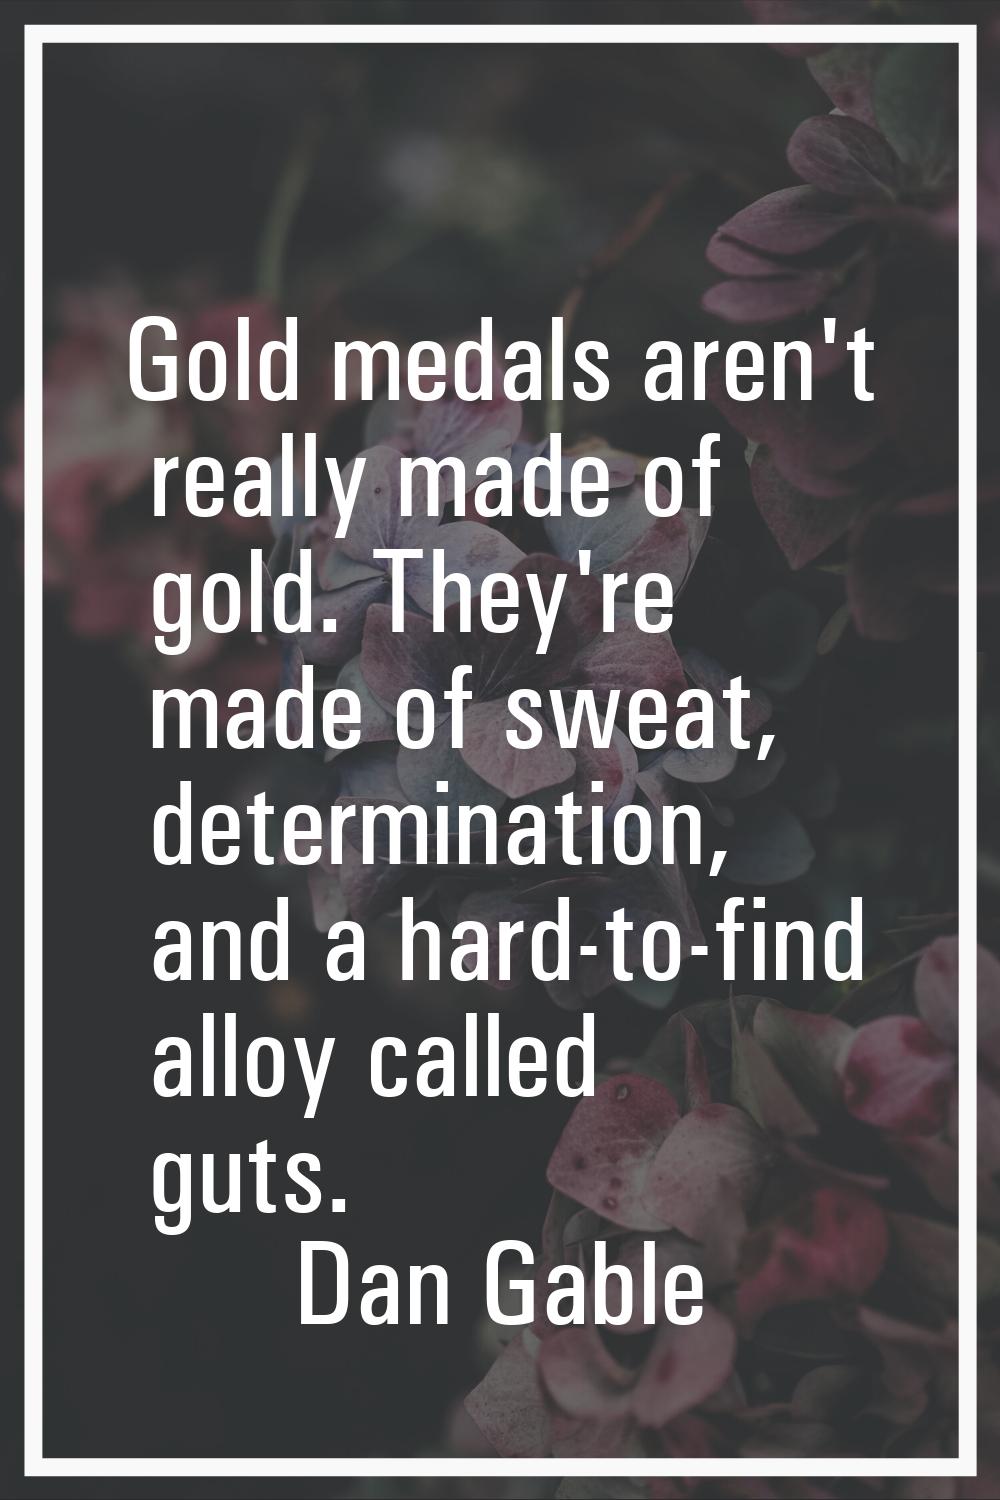 Gold medals aren't really made of gold. They're made of sweat, determination, and a hard-to-find al